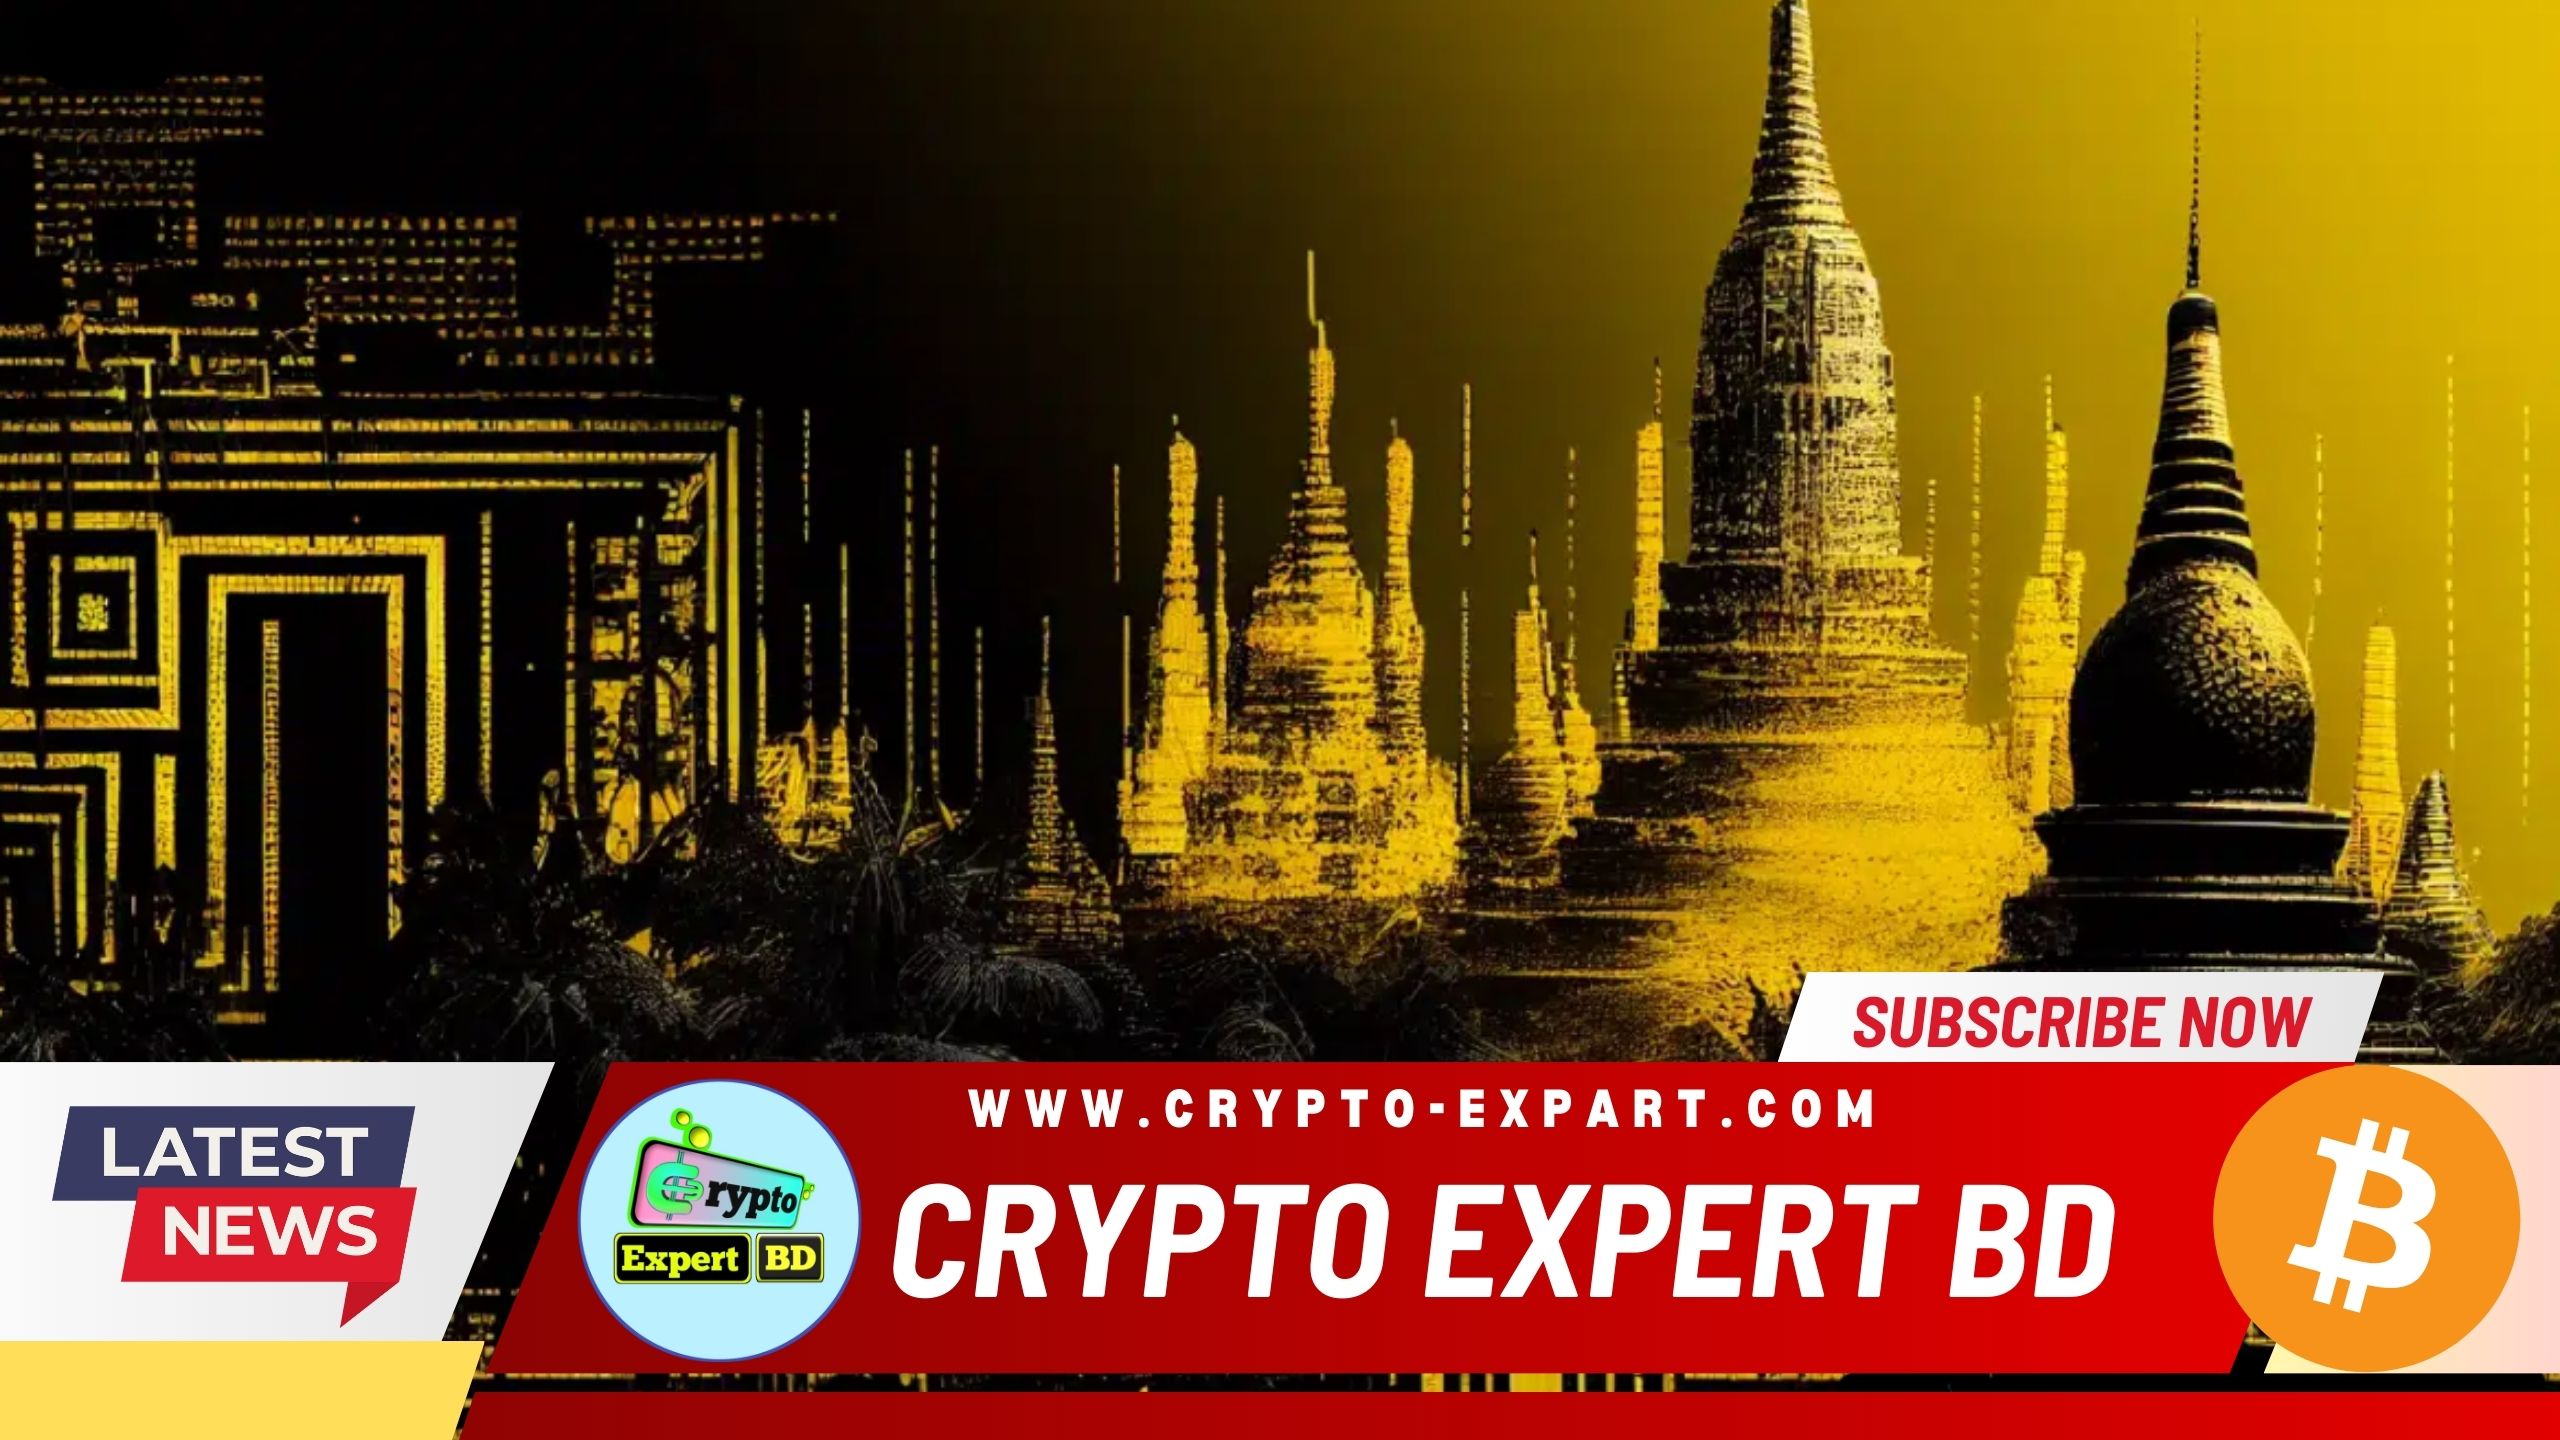 Bittrex Global CEO Praises Thailand’s Rigorous Regulatory Approach to Cryptocurrency